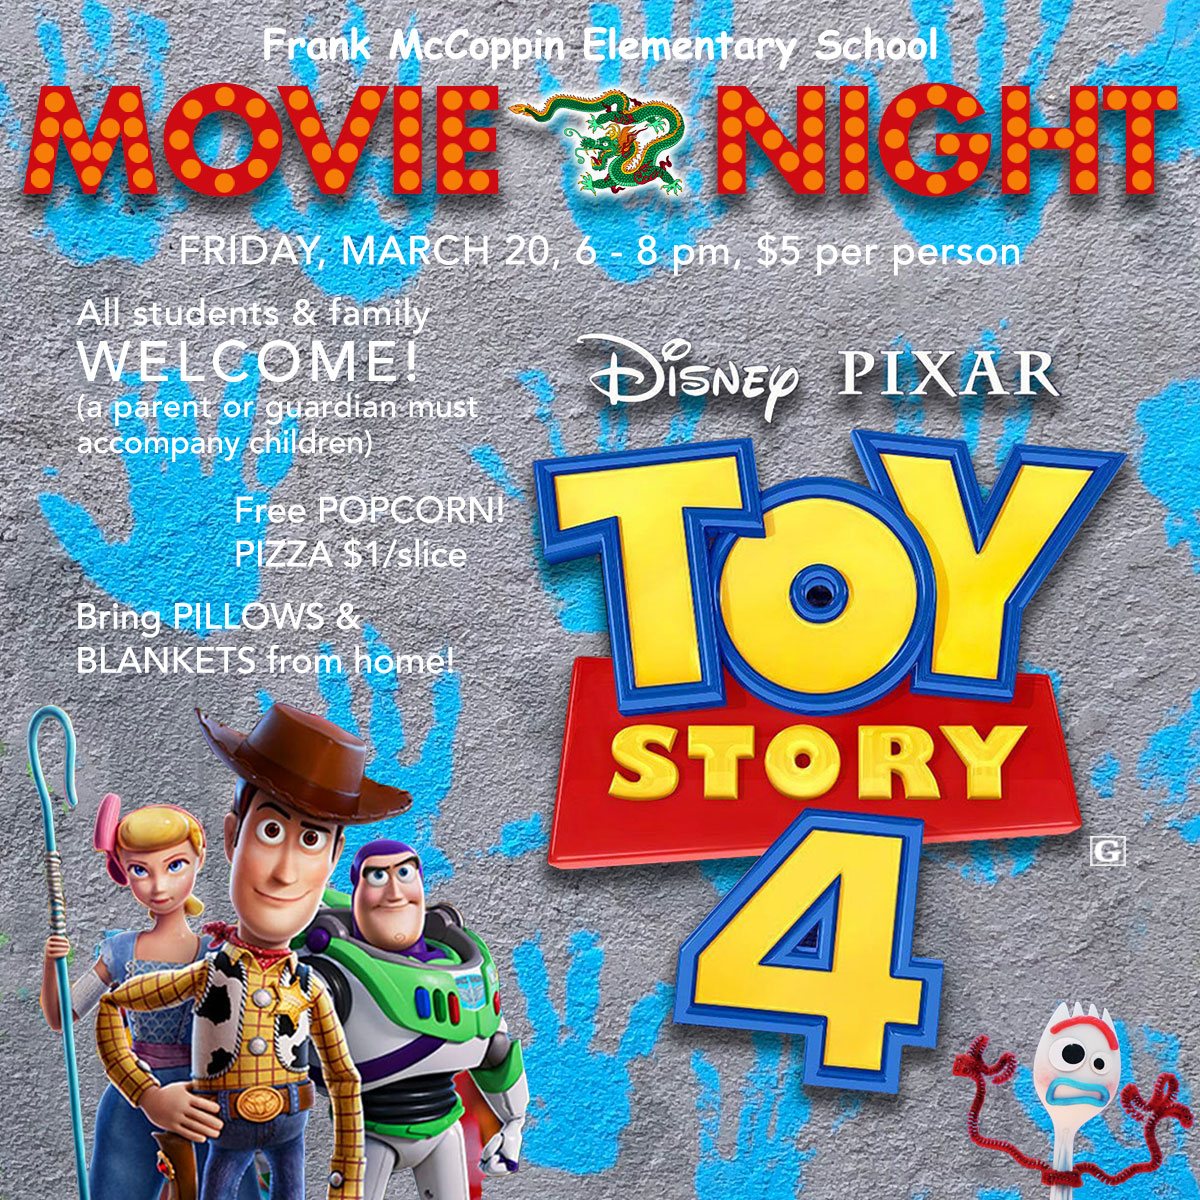 Movie night, featuring Toy Story 4, on 3/20/20